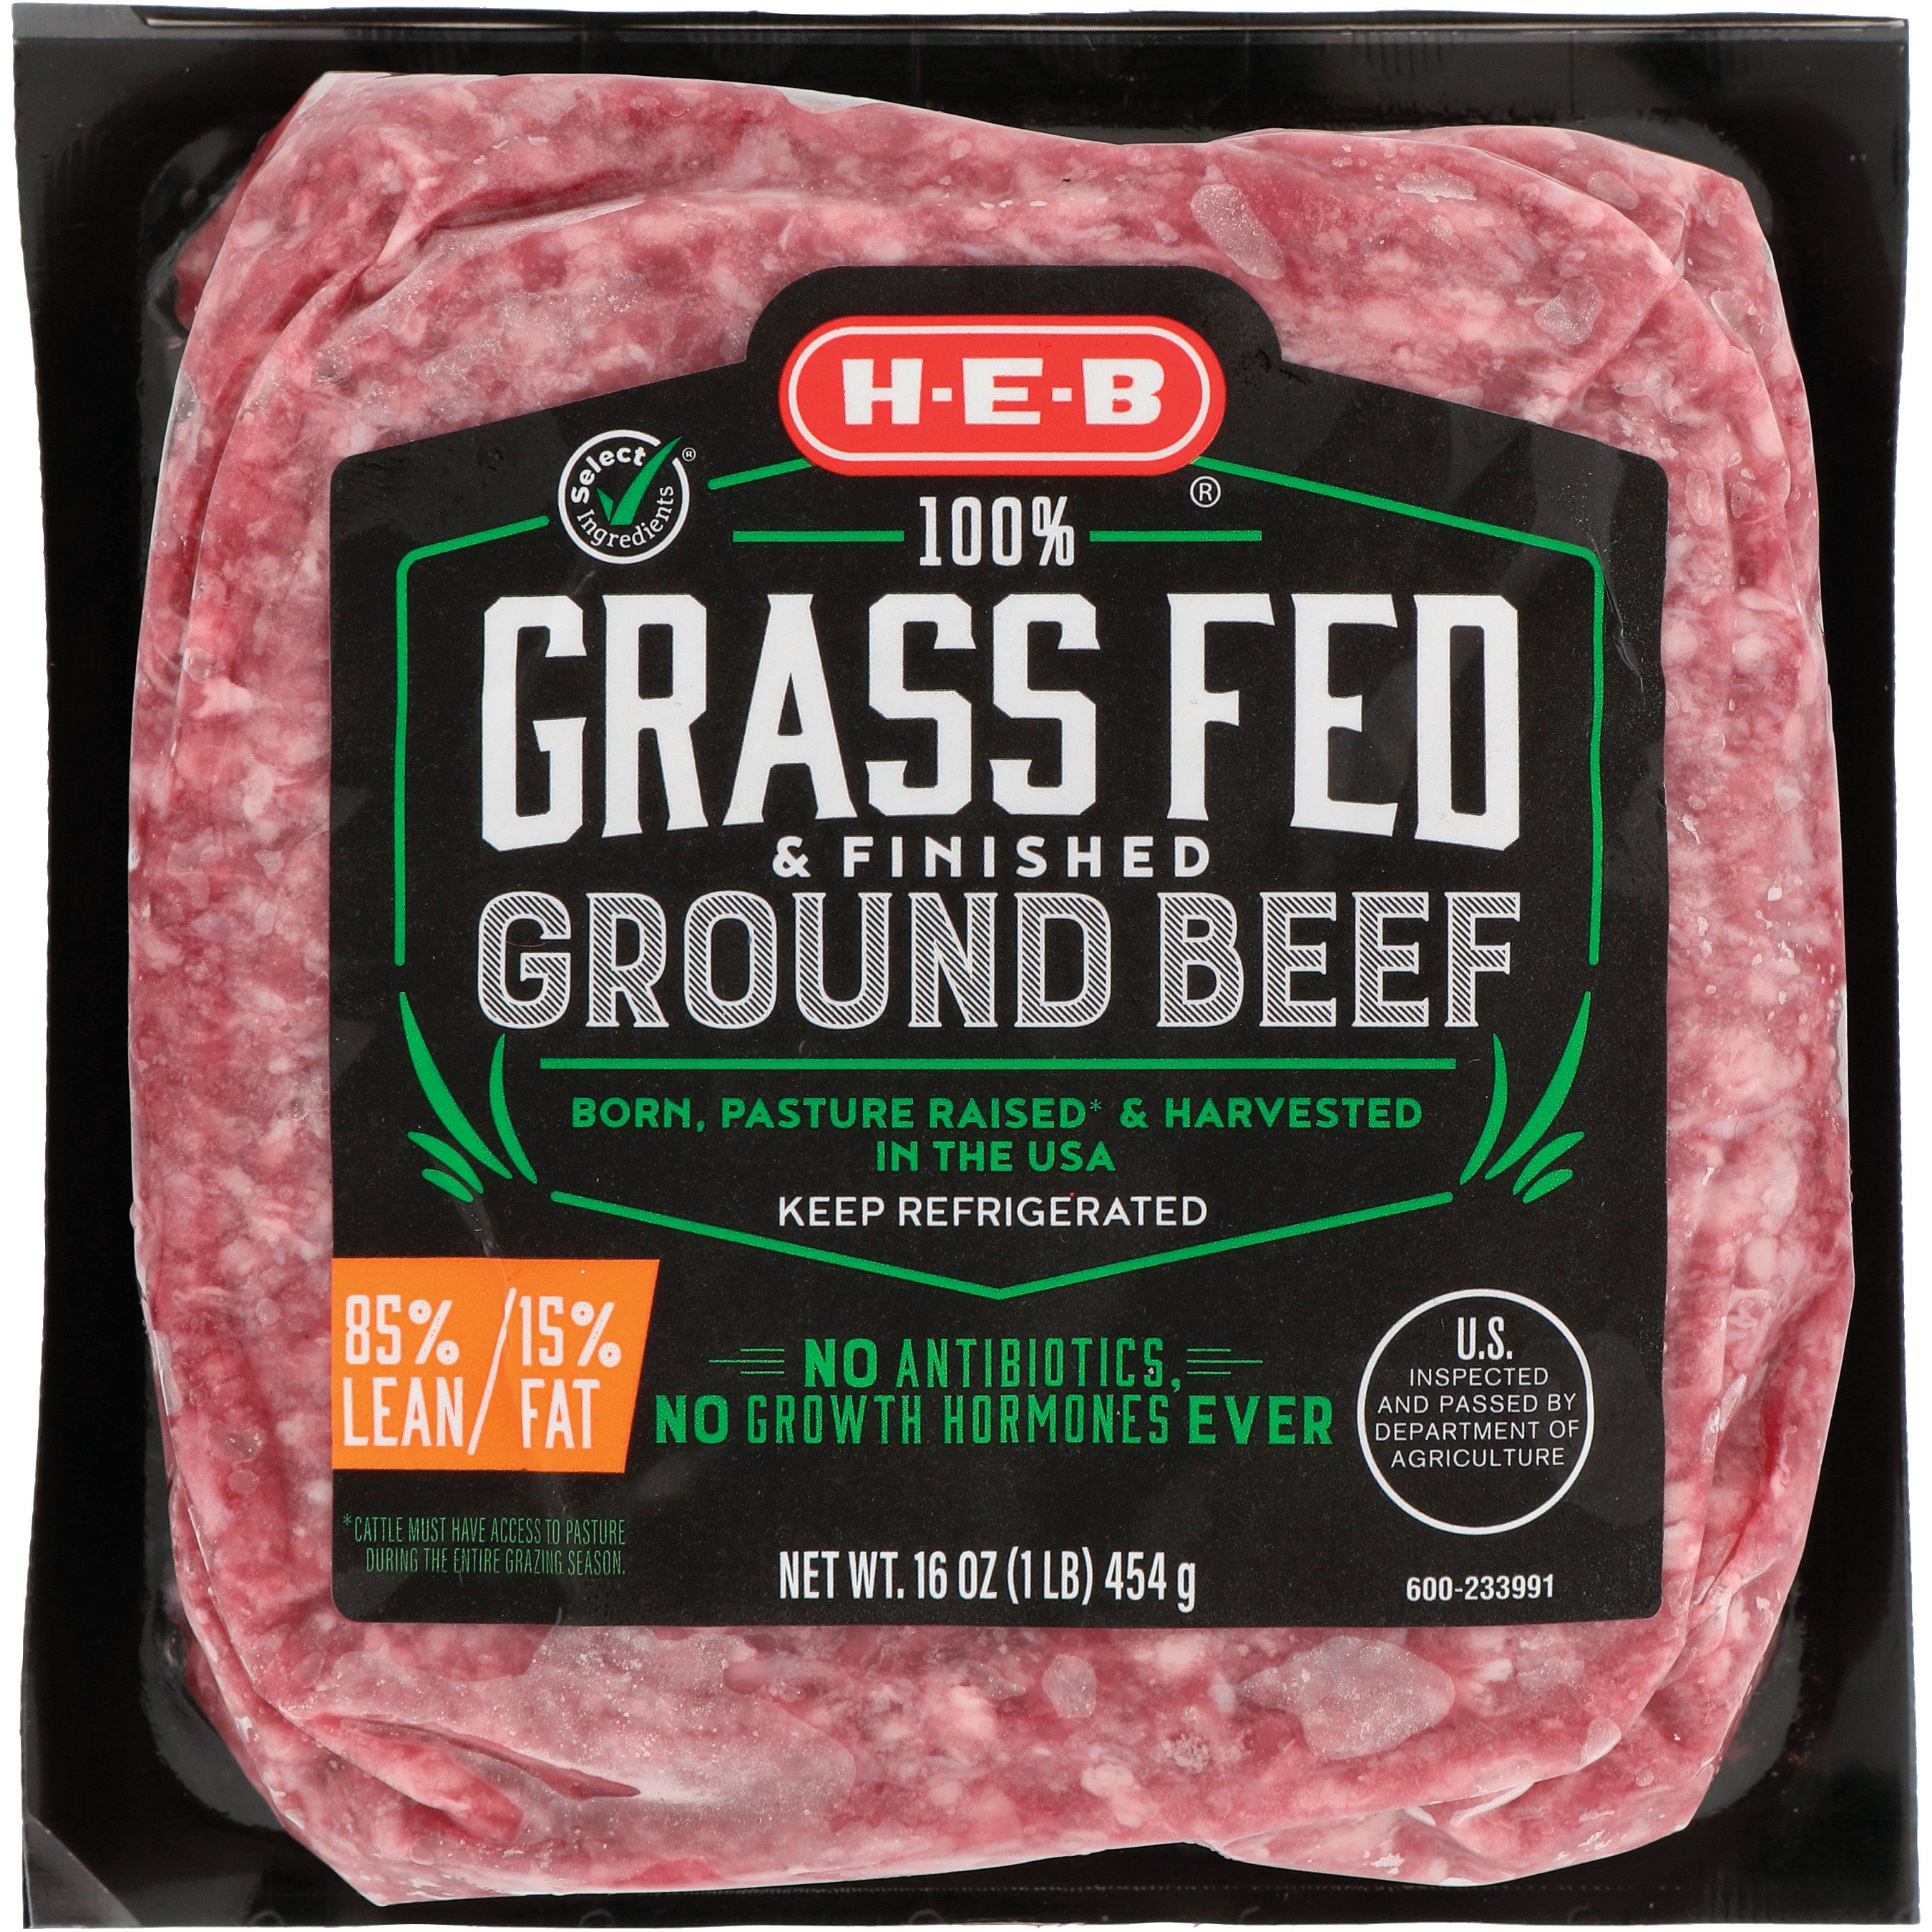 Grass-Fed vs. Grain-Fed Beef: What's the Healthy Choice?